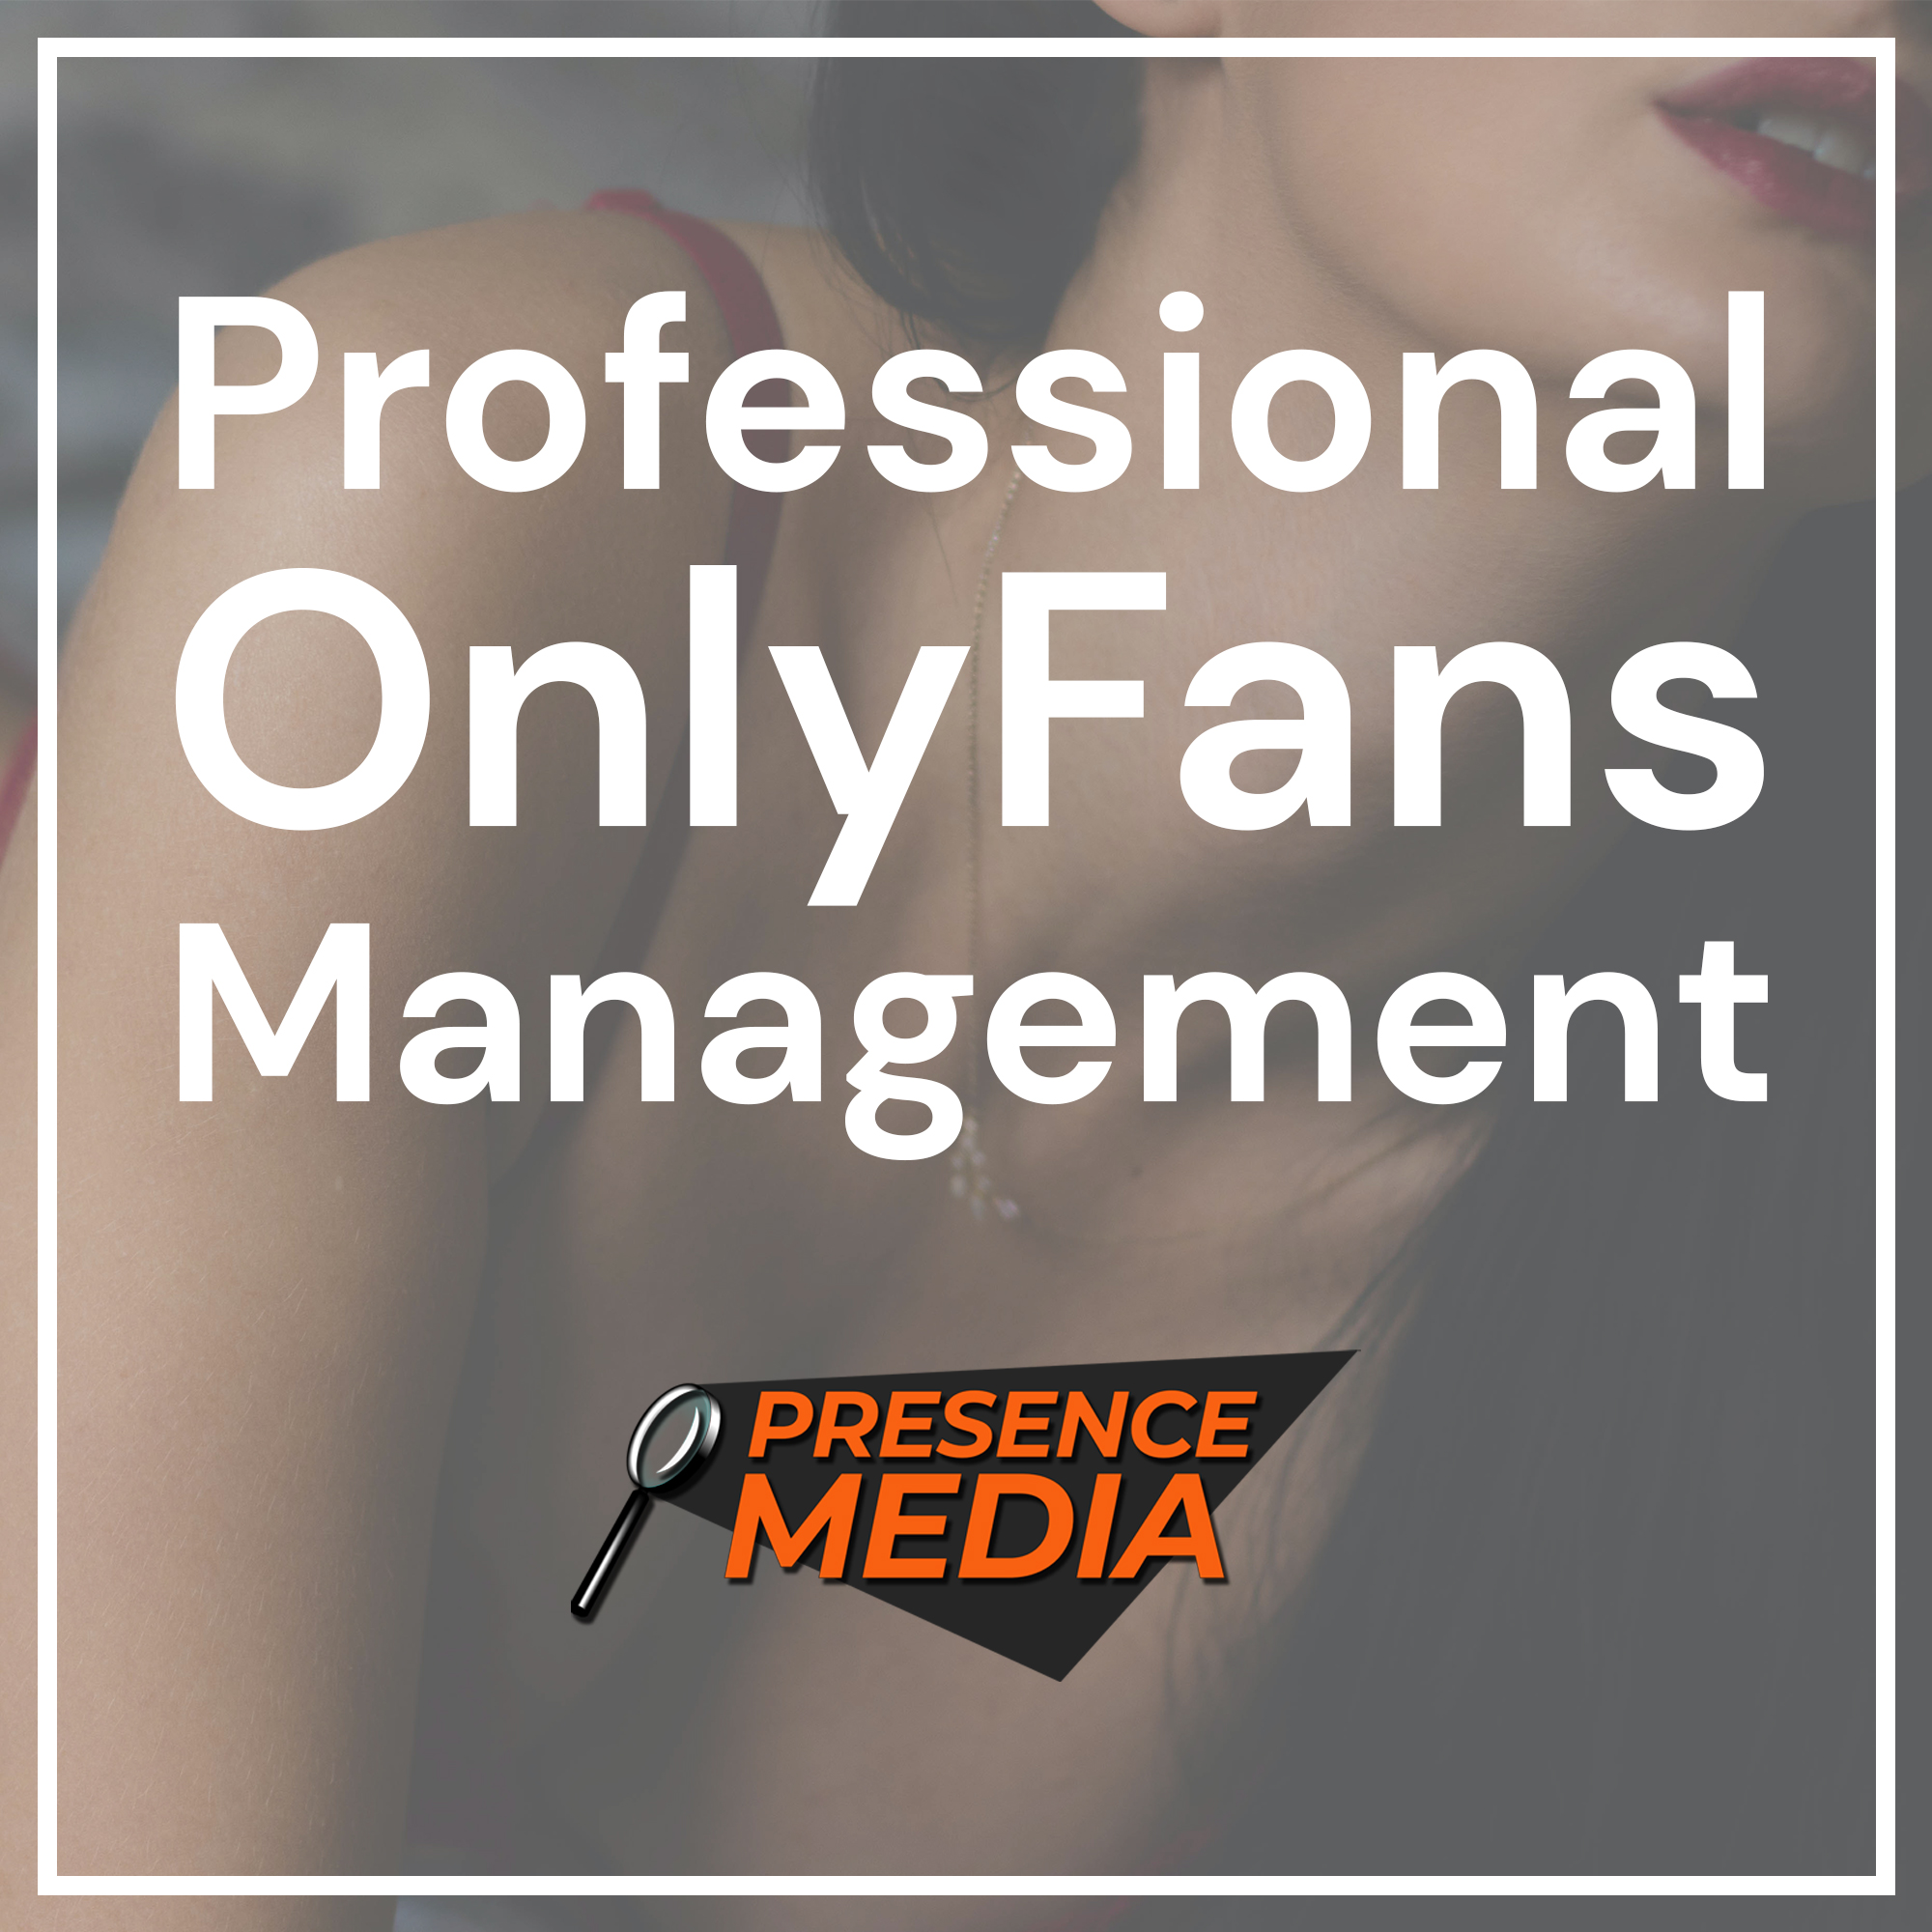 Manager onlyfans content OnlyFans Marketing